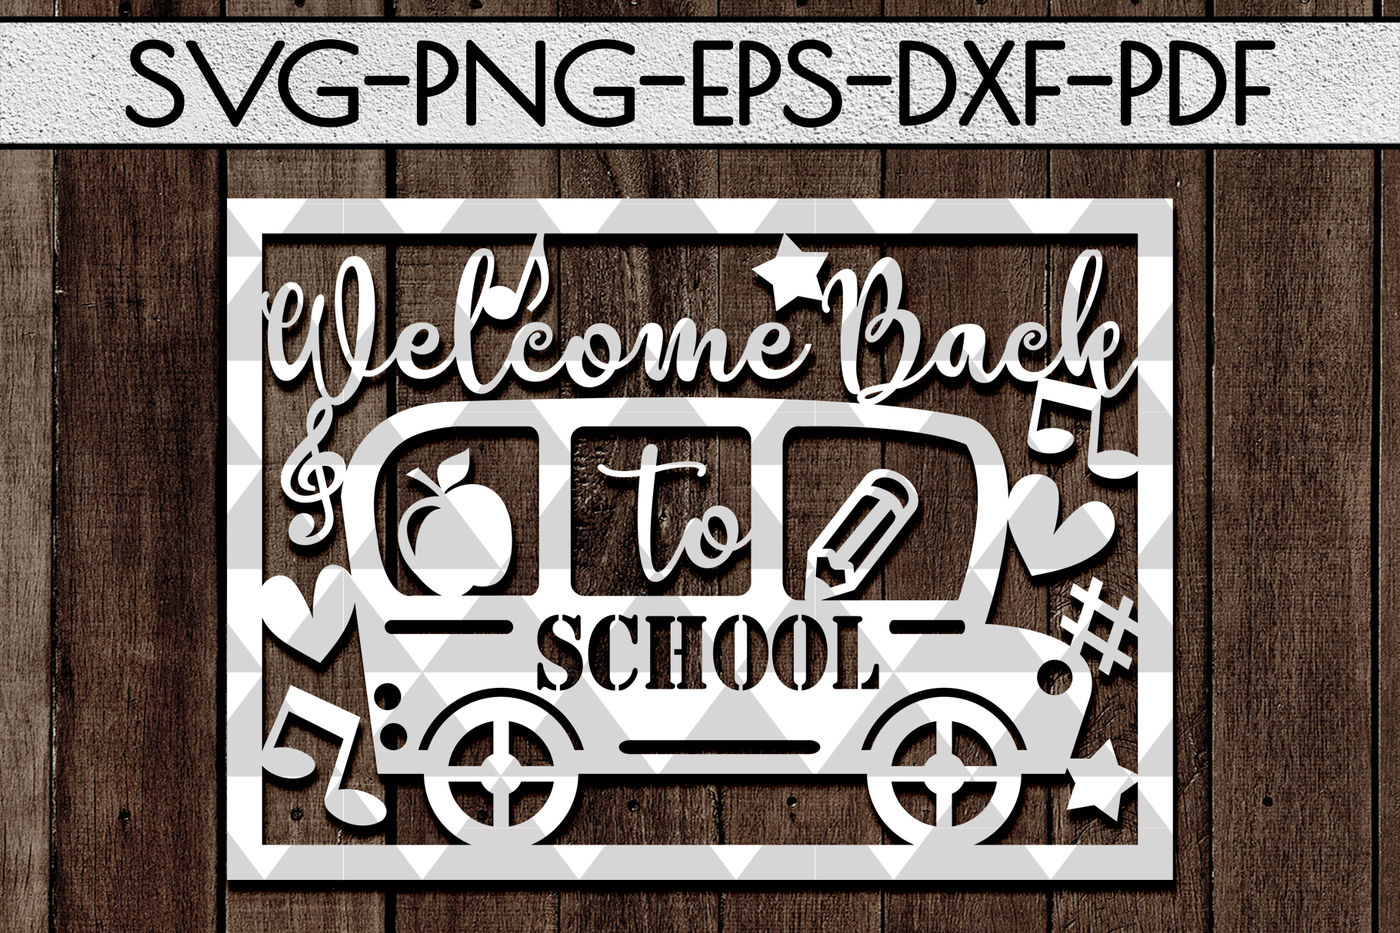 Welcome Back Svg, Welcome Back Prints Clipart Decal, Welcome Back Cricut,  Silhouette Cameo,welcome Back Sticker, Calligraphy Svg 